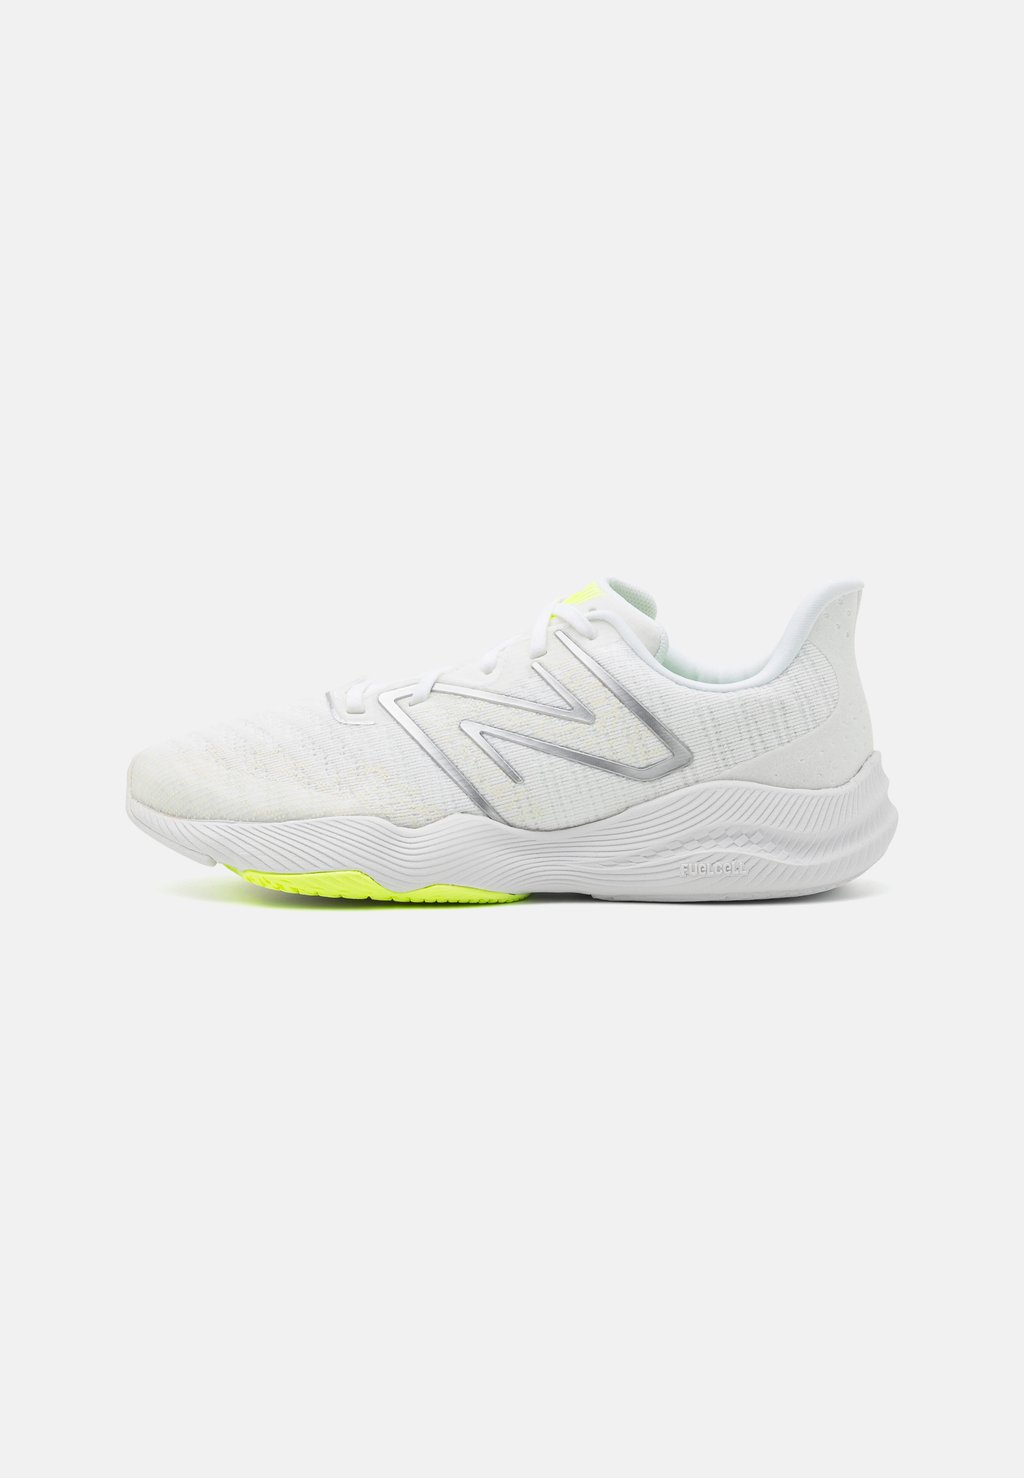 Кроссовки FUELCELL SHIFT TR V2 New Balance, цвет white кроссовки fuelcell shift tr v2 new balance титан